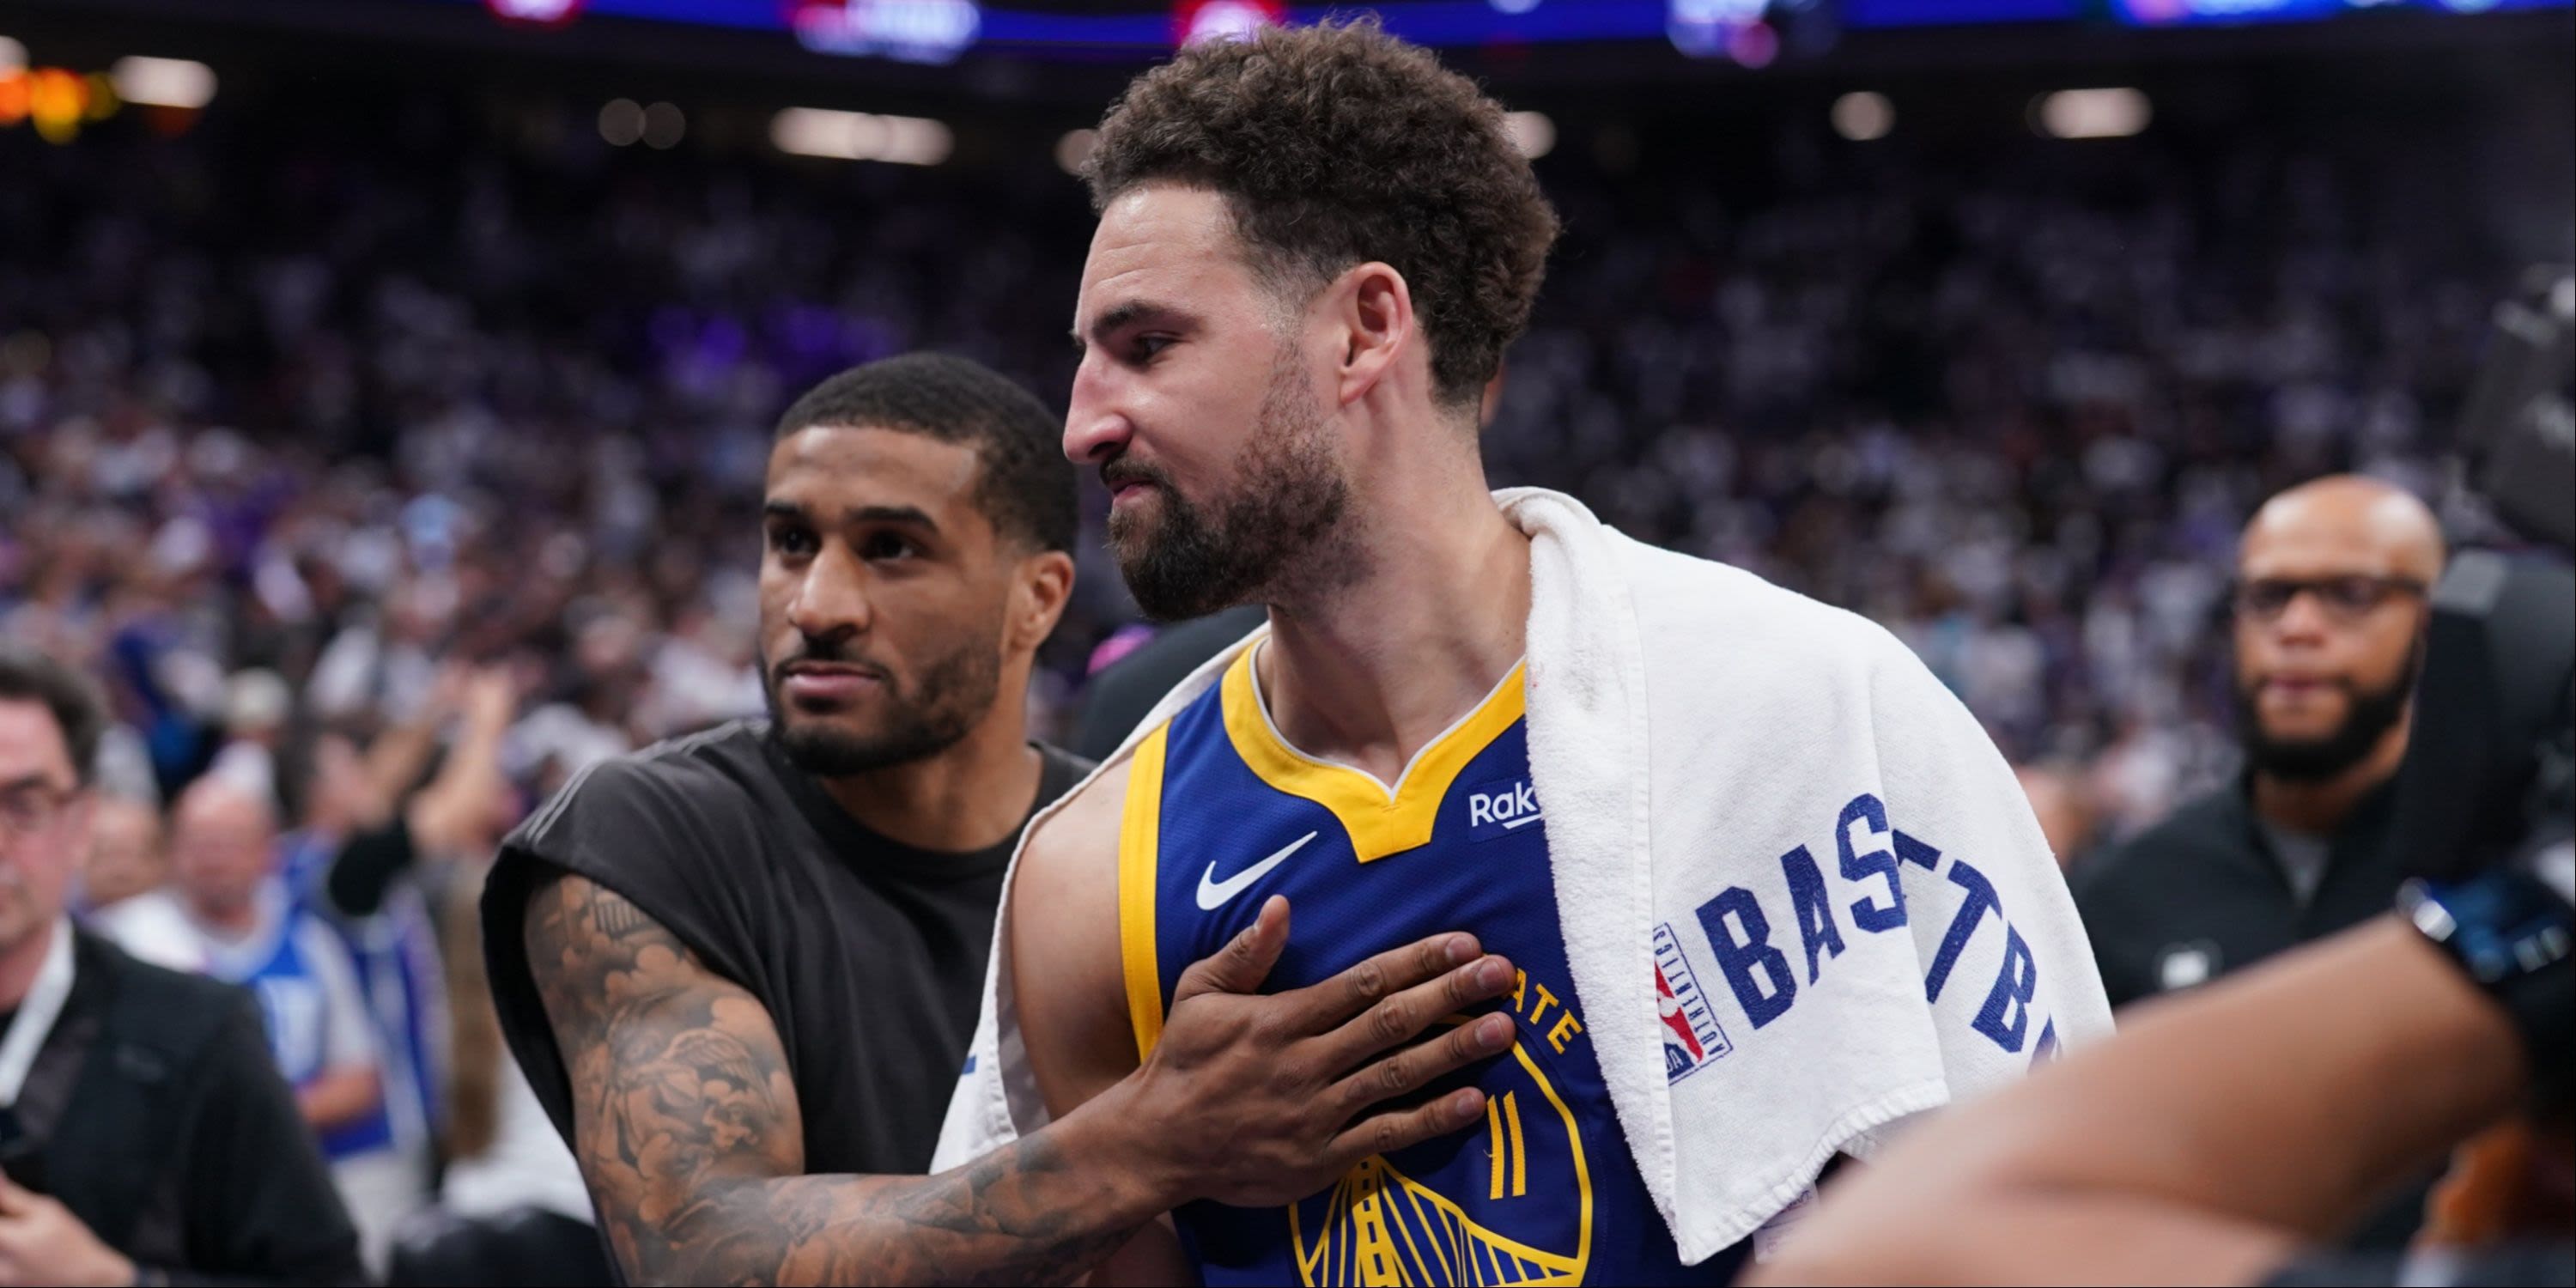 Report: Warriors, Thompson Have Made 'No Progress' On New Contract